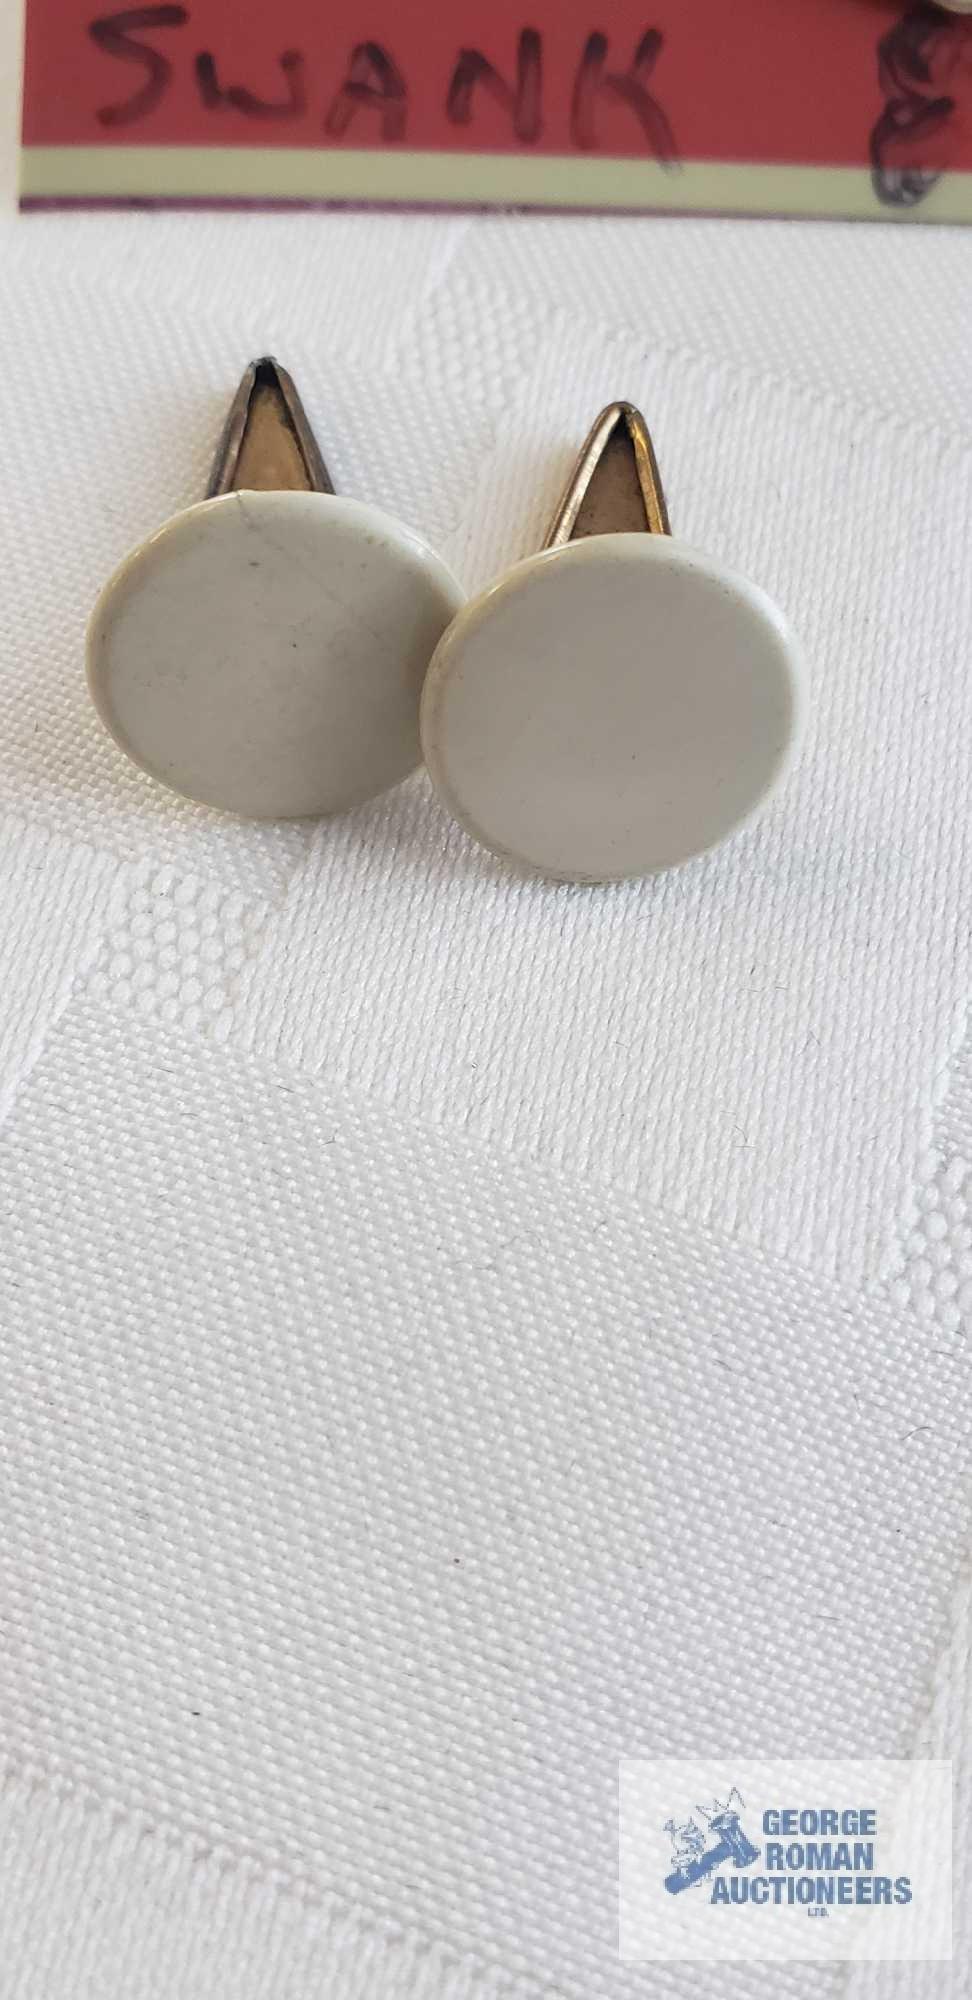 Cufflinks and tie tack